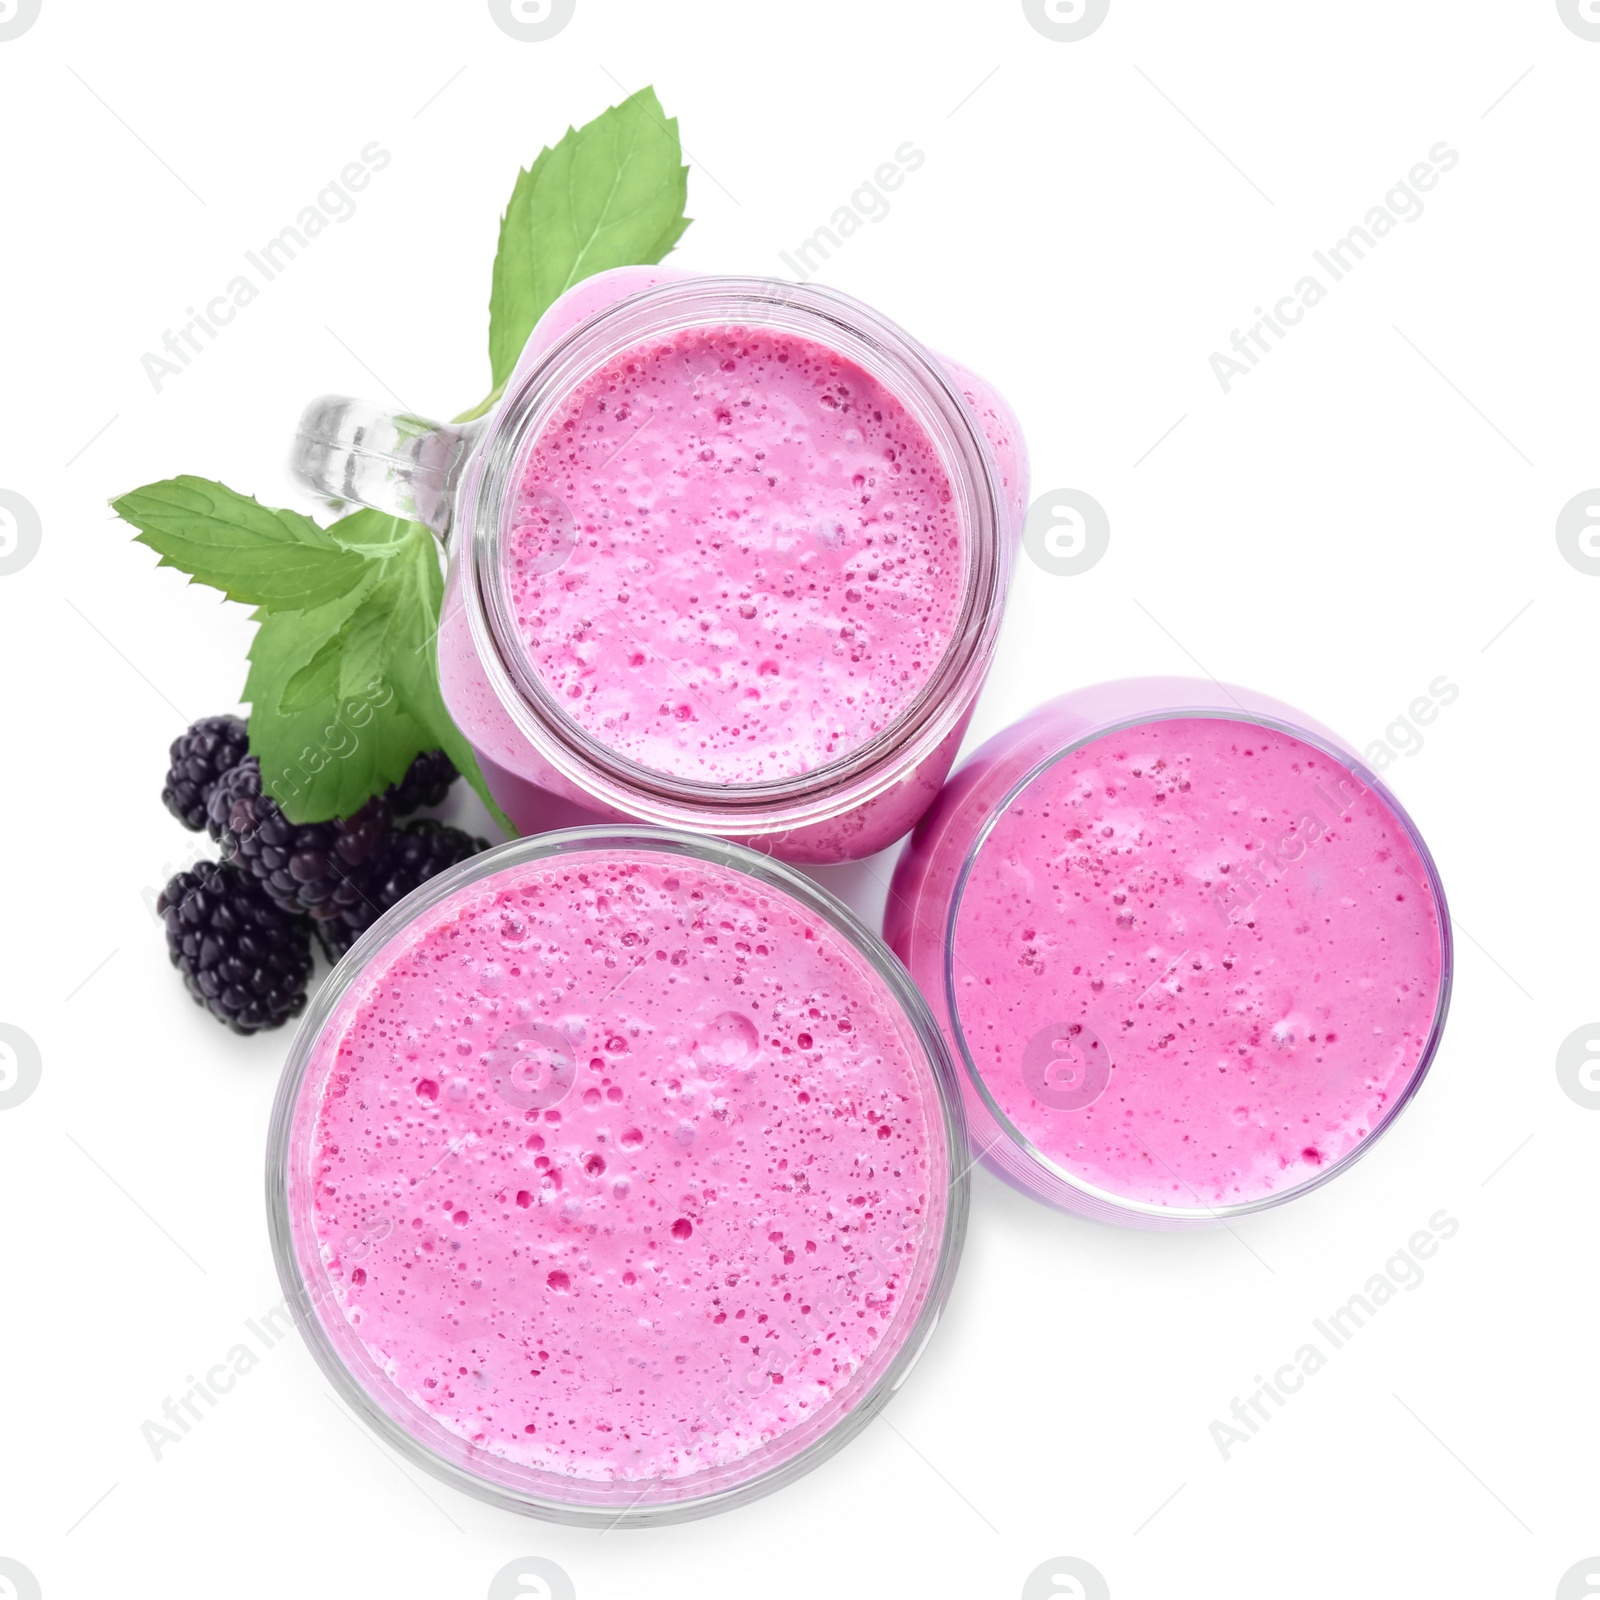 Photo of Delicious blackberry smoothie and berries on white background, top view